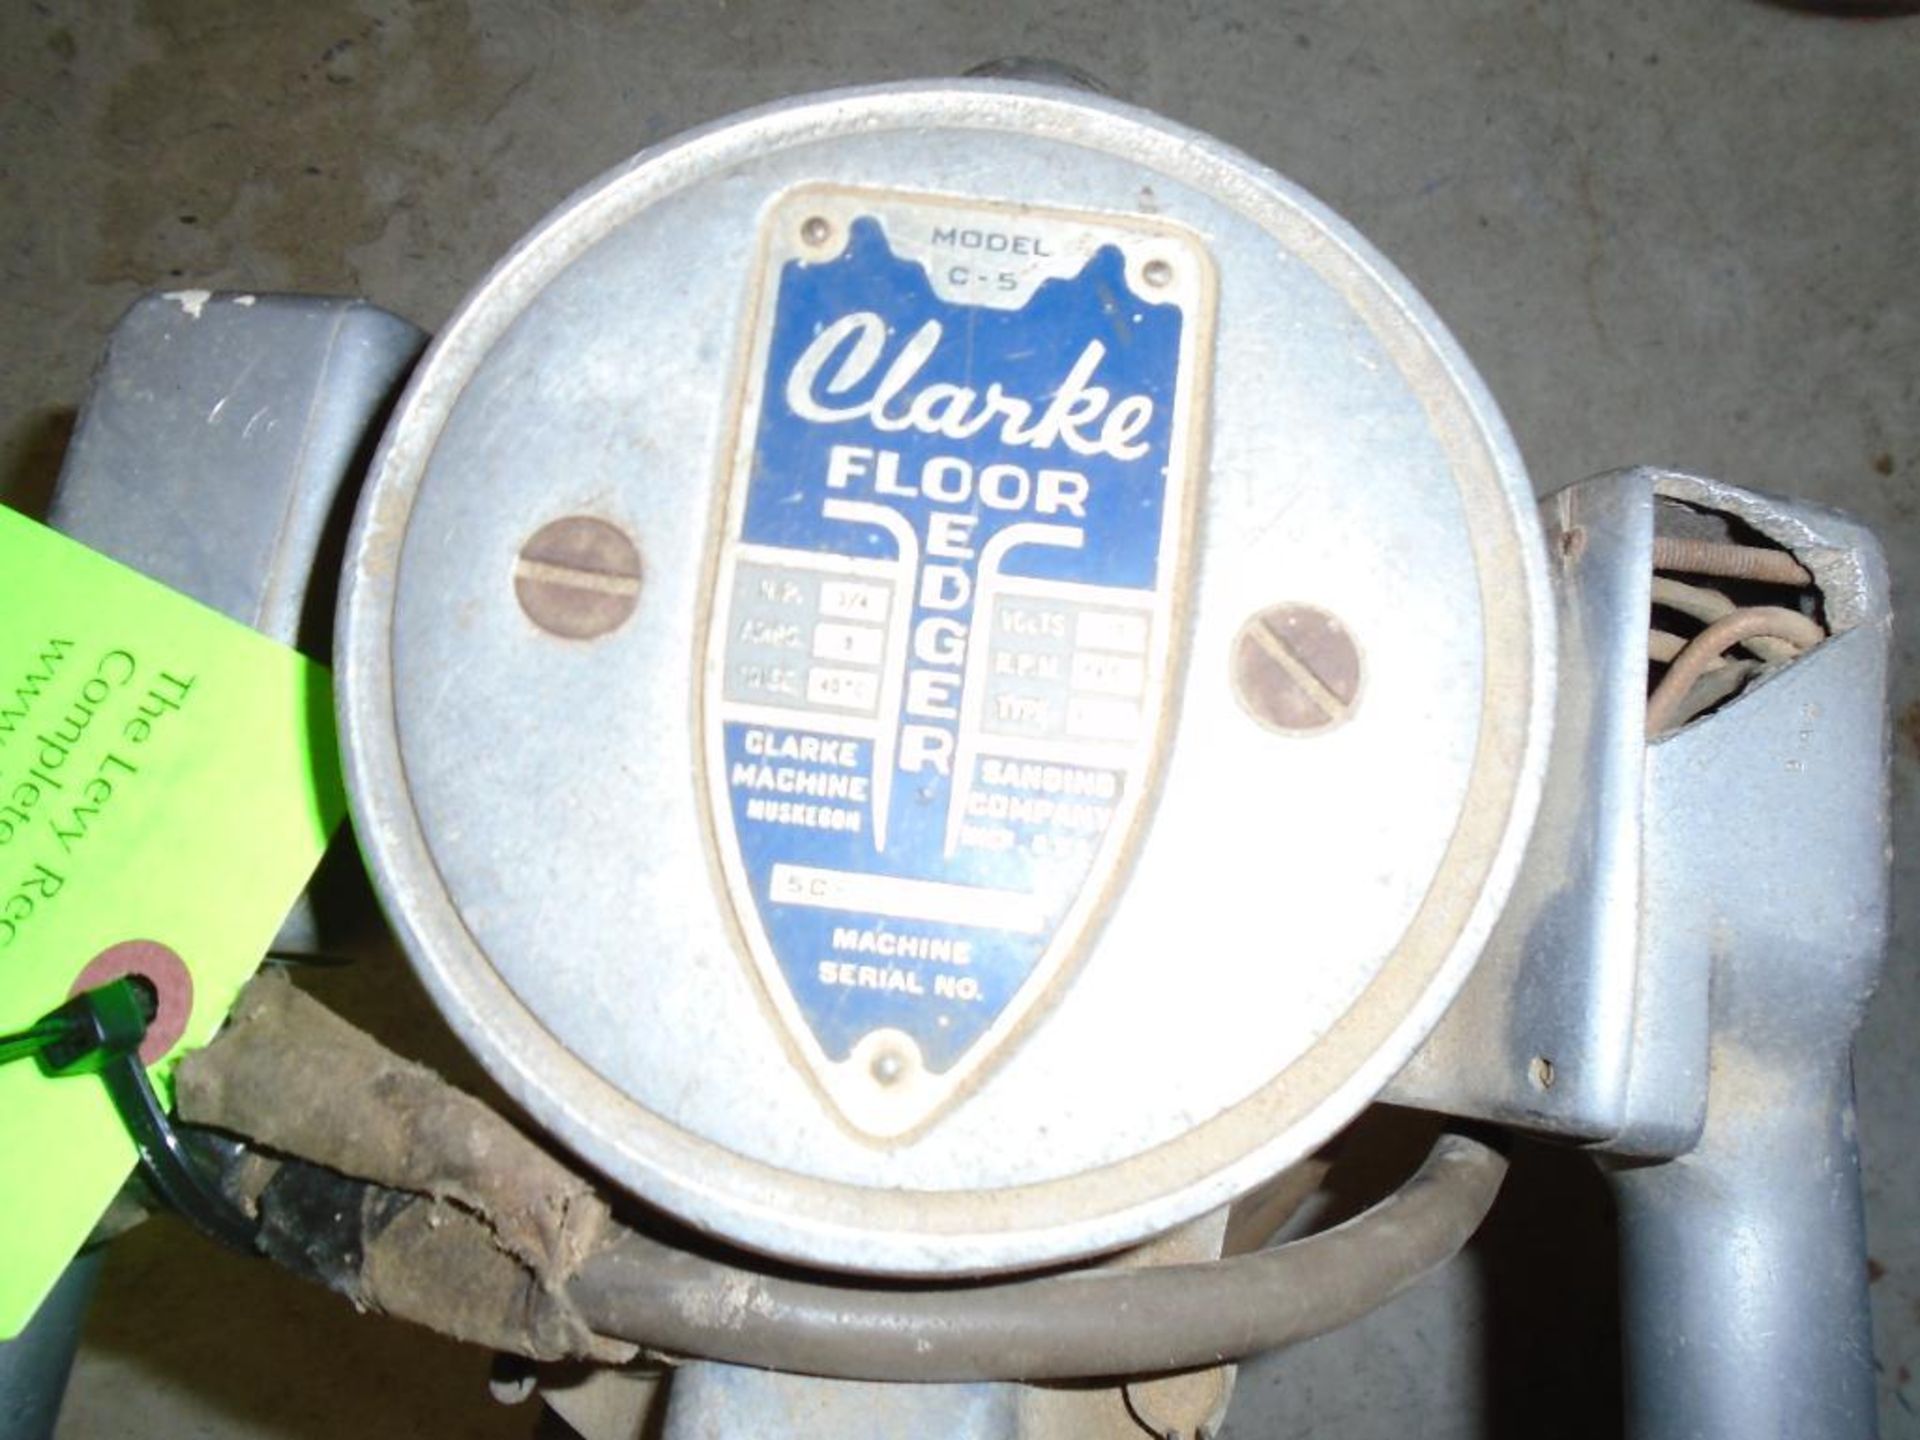 Porter Cable Type E77 Floor Edger - Image 4 of 4